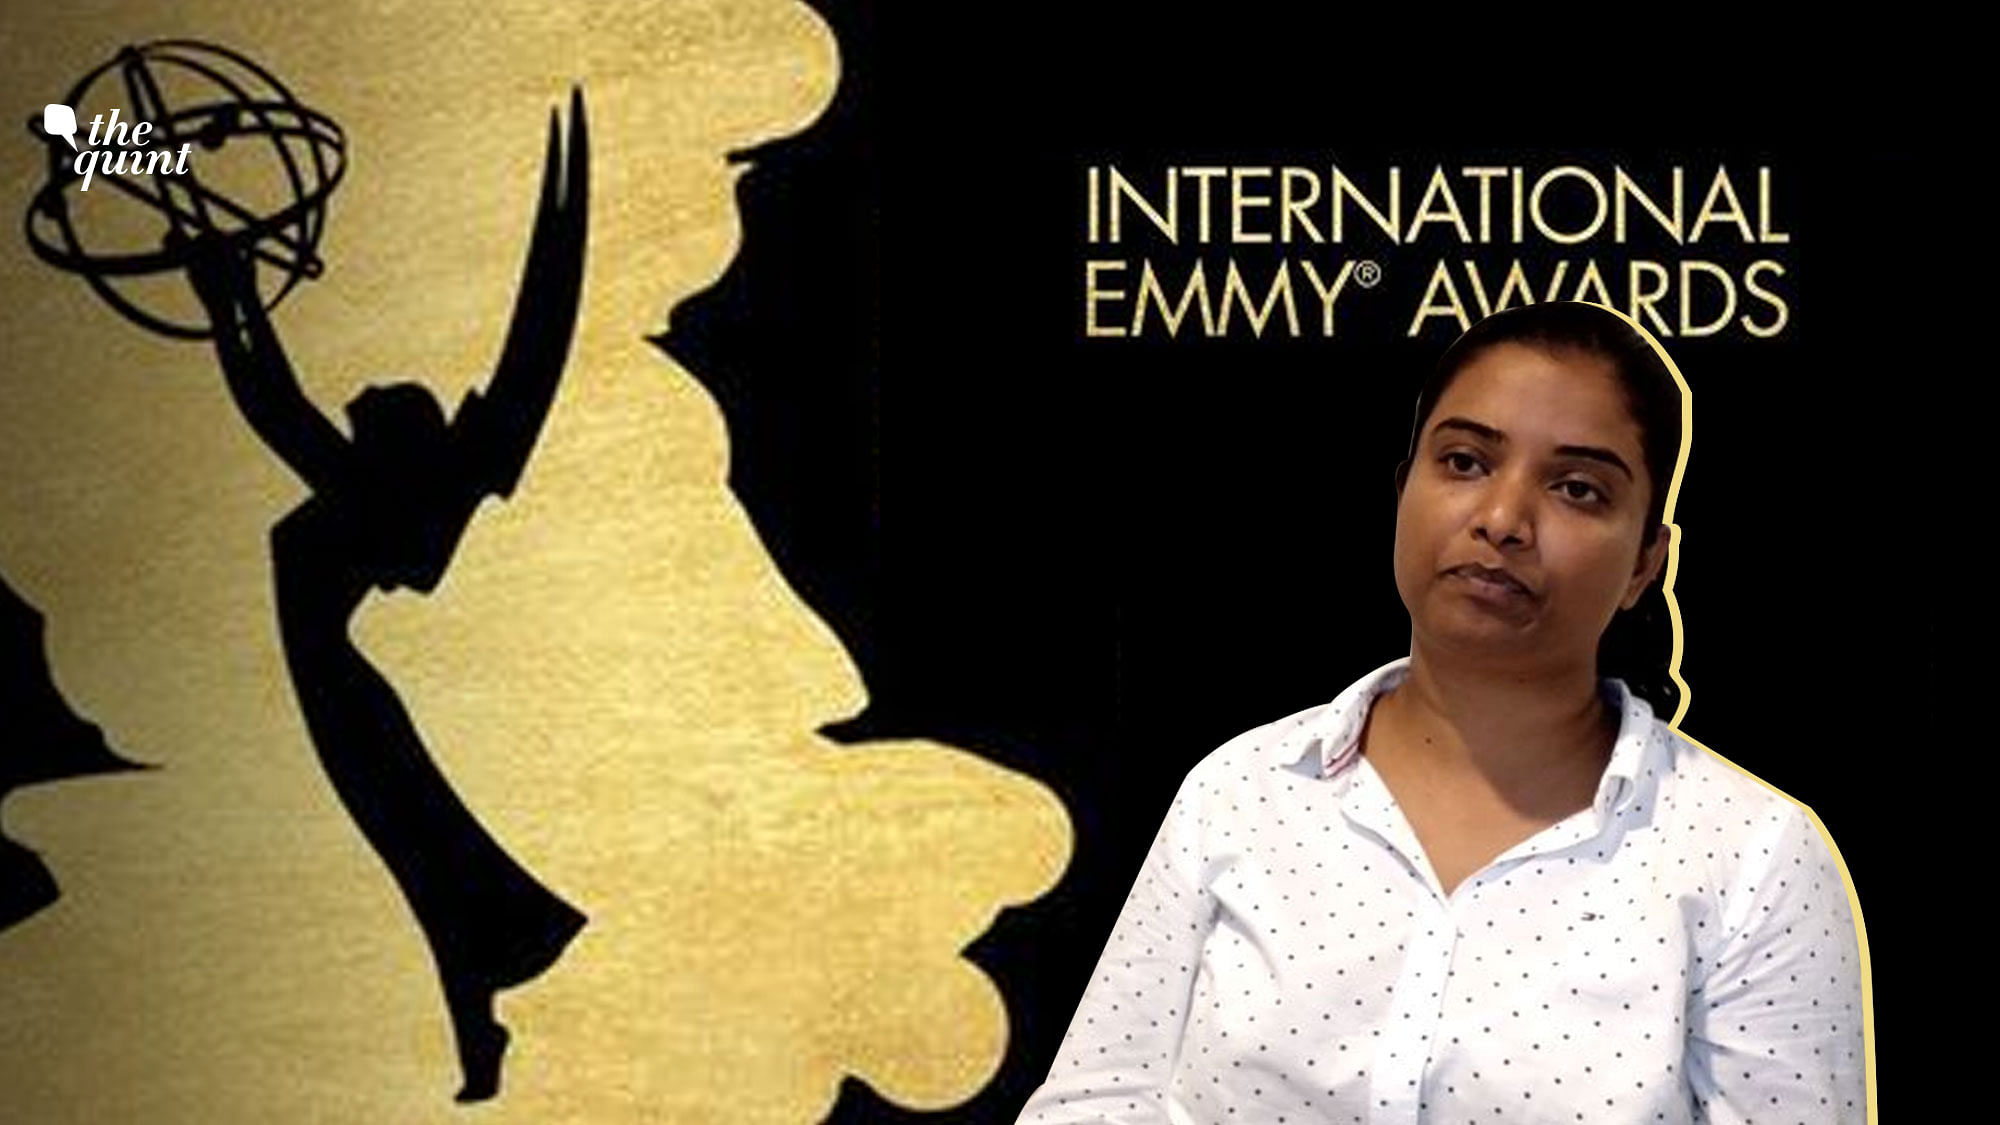 Sandhya hopes the accreditation from Emmy will help translate caste violence to become a topic for debate in India.